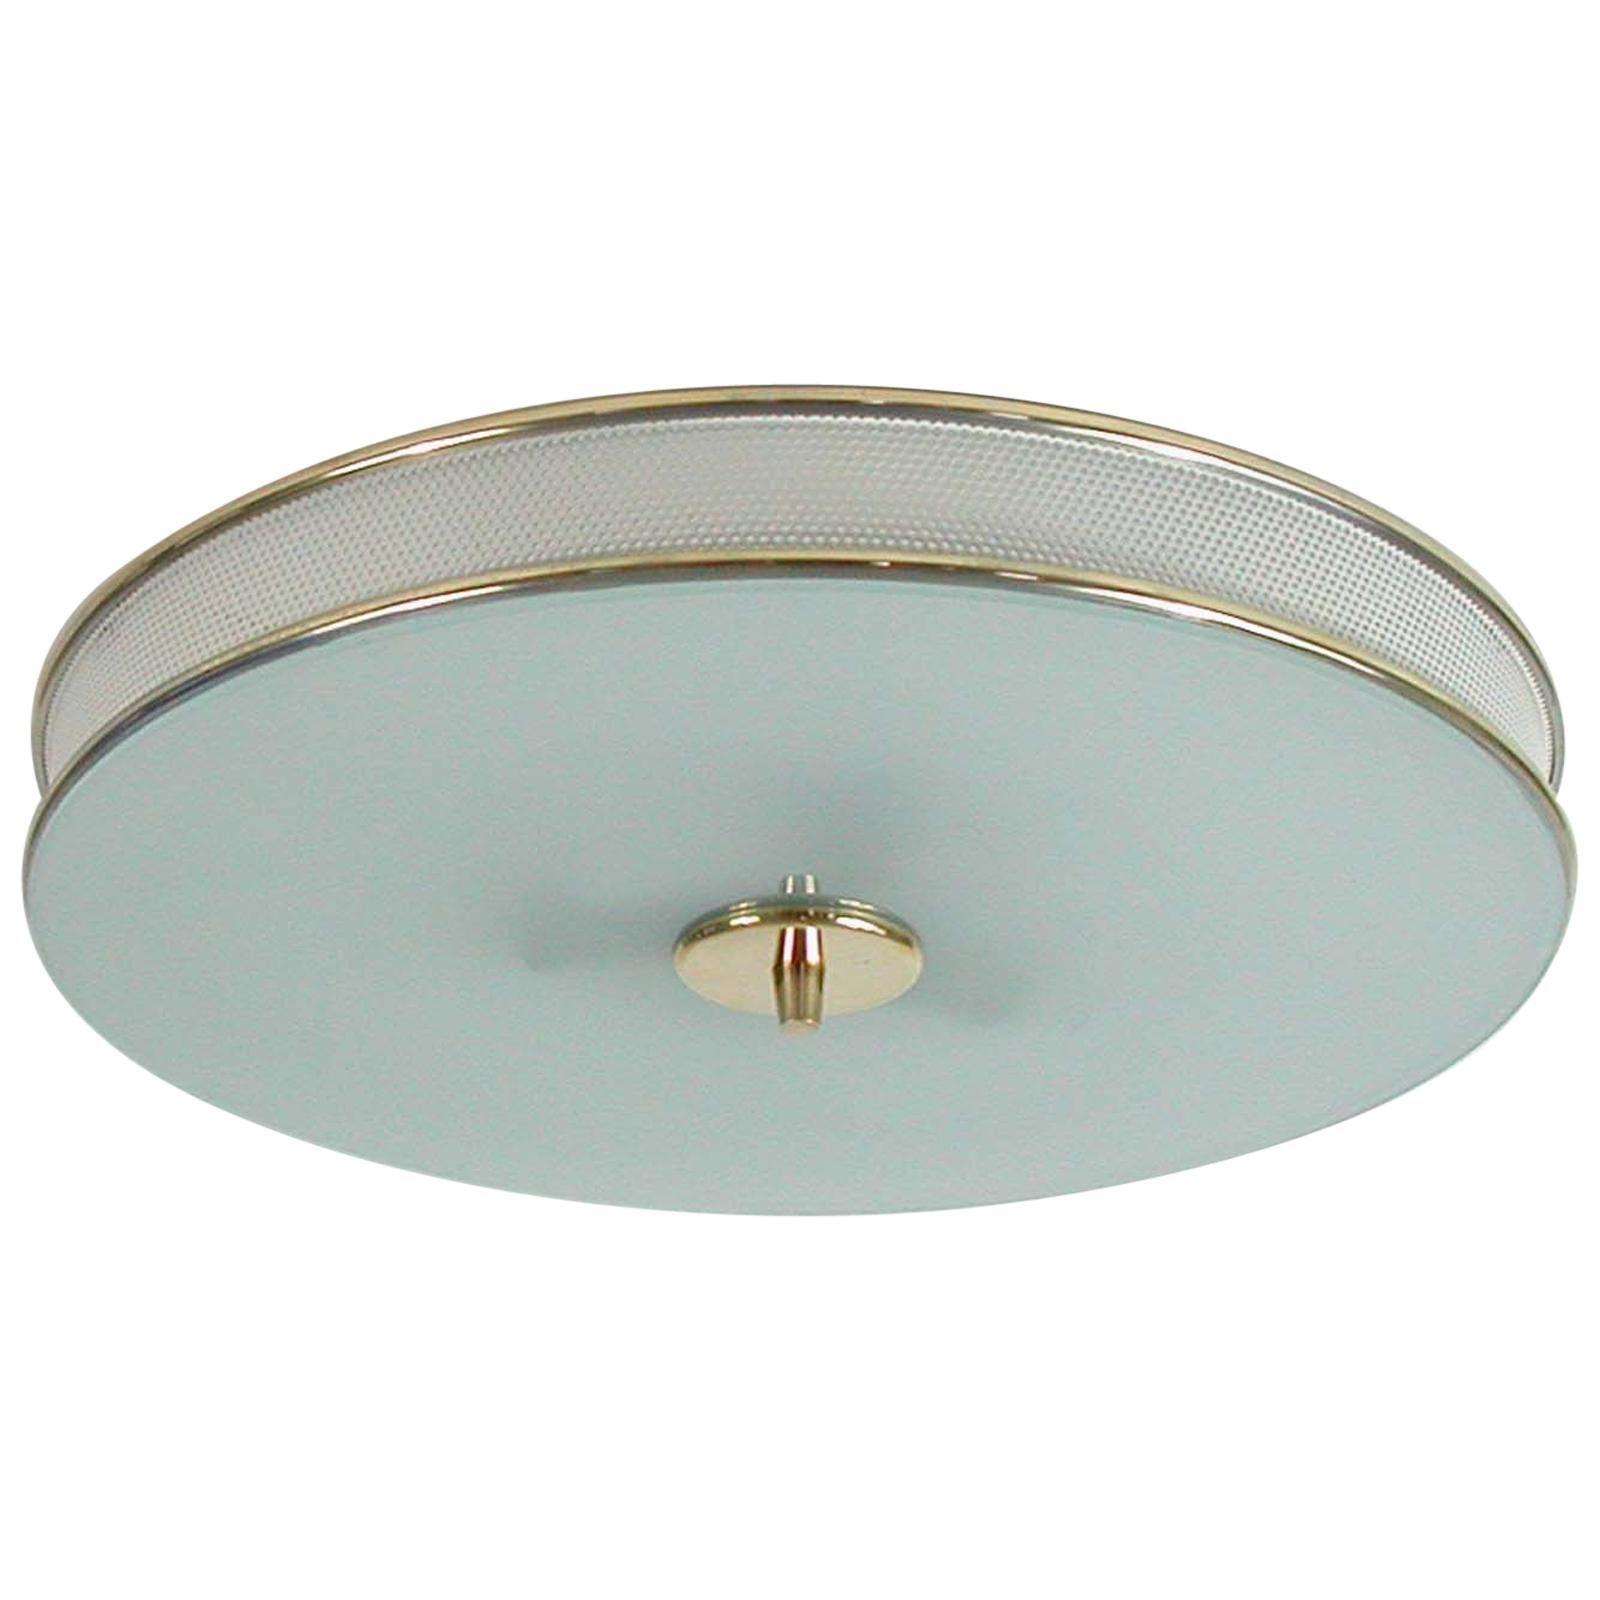 French Midcentury Cream White and Brass Mategot Style Flush Mount, 1950s For Sale